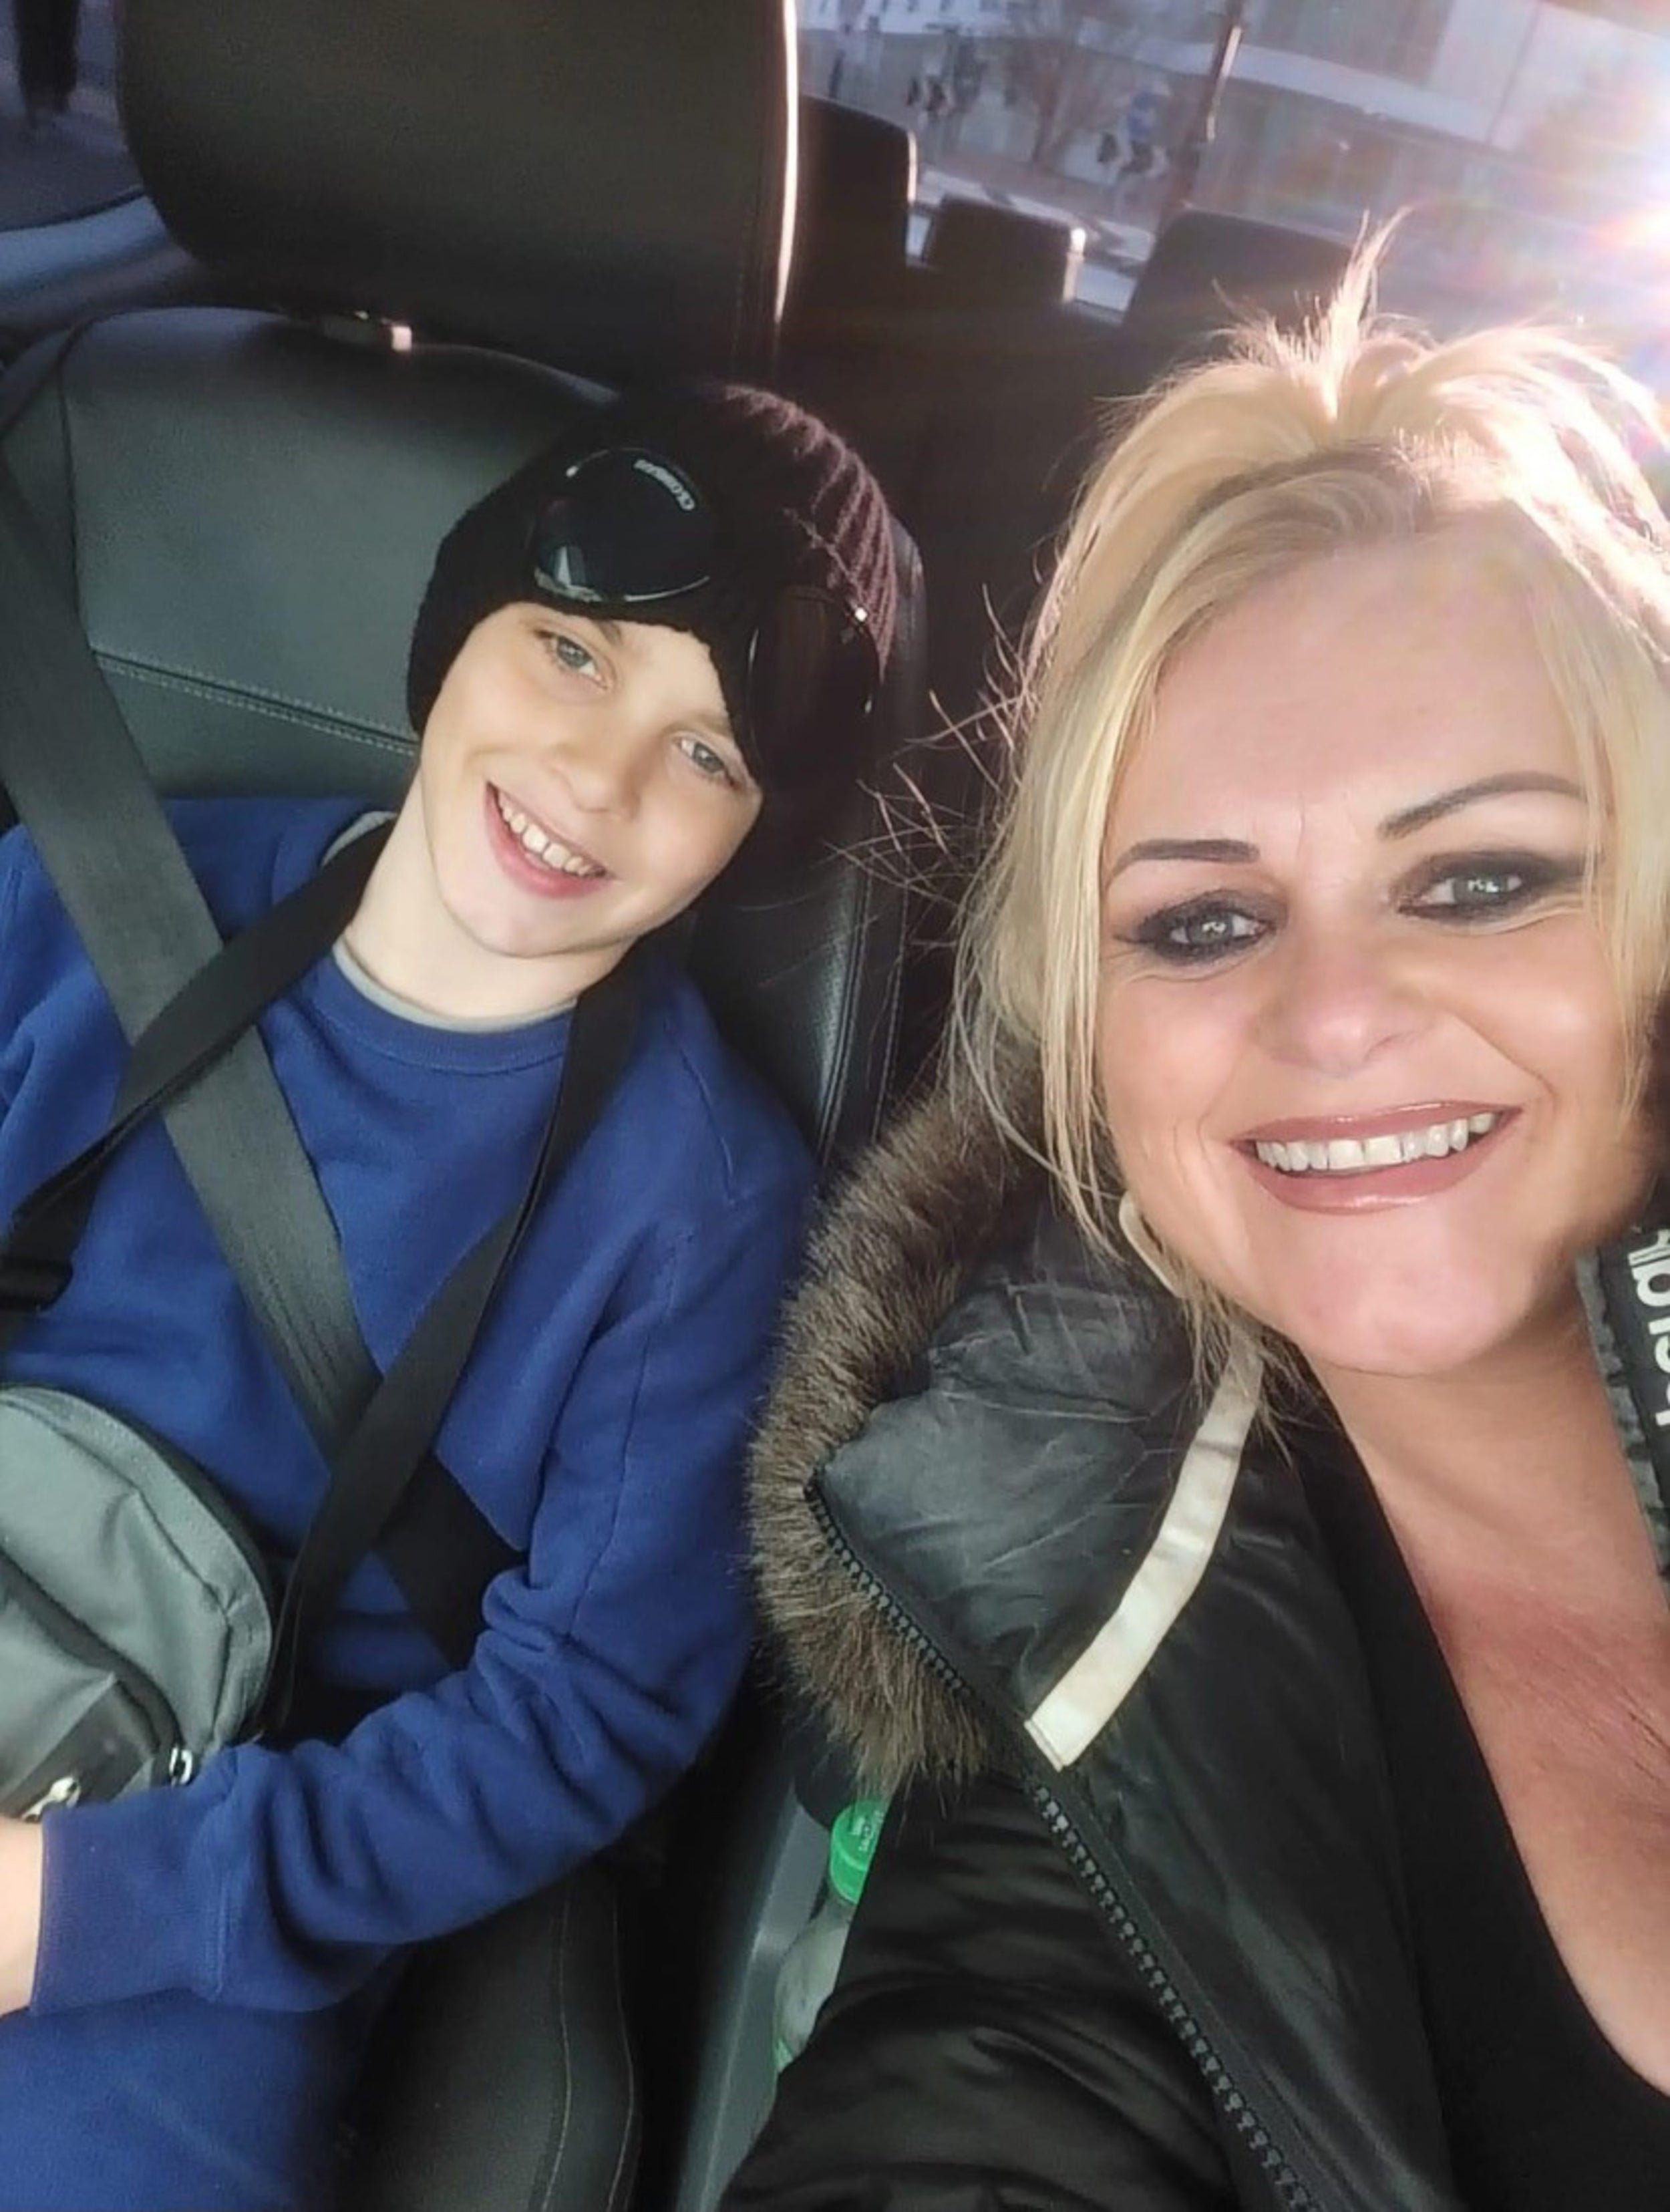 Hollie Dance believes her son was taking part in an online challenge when he died on 7 April 2022